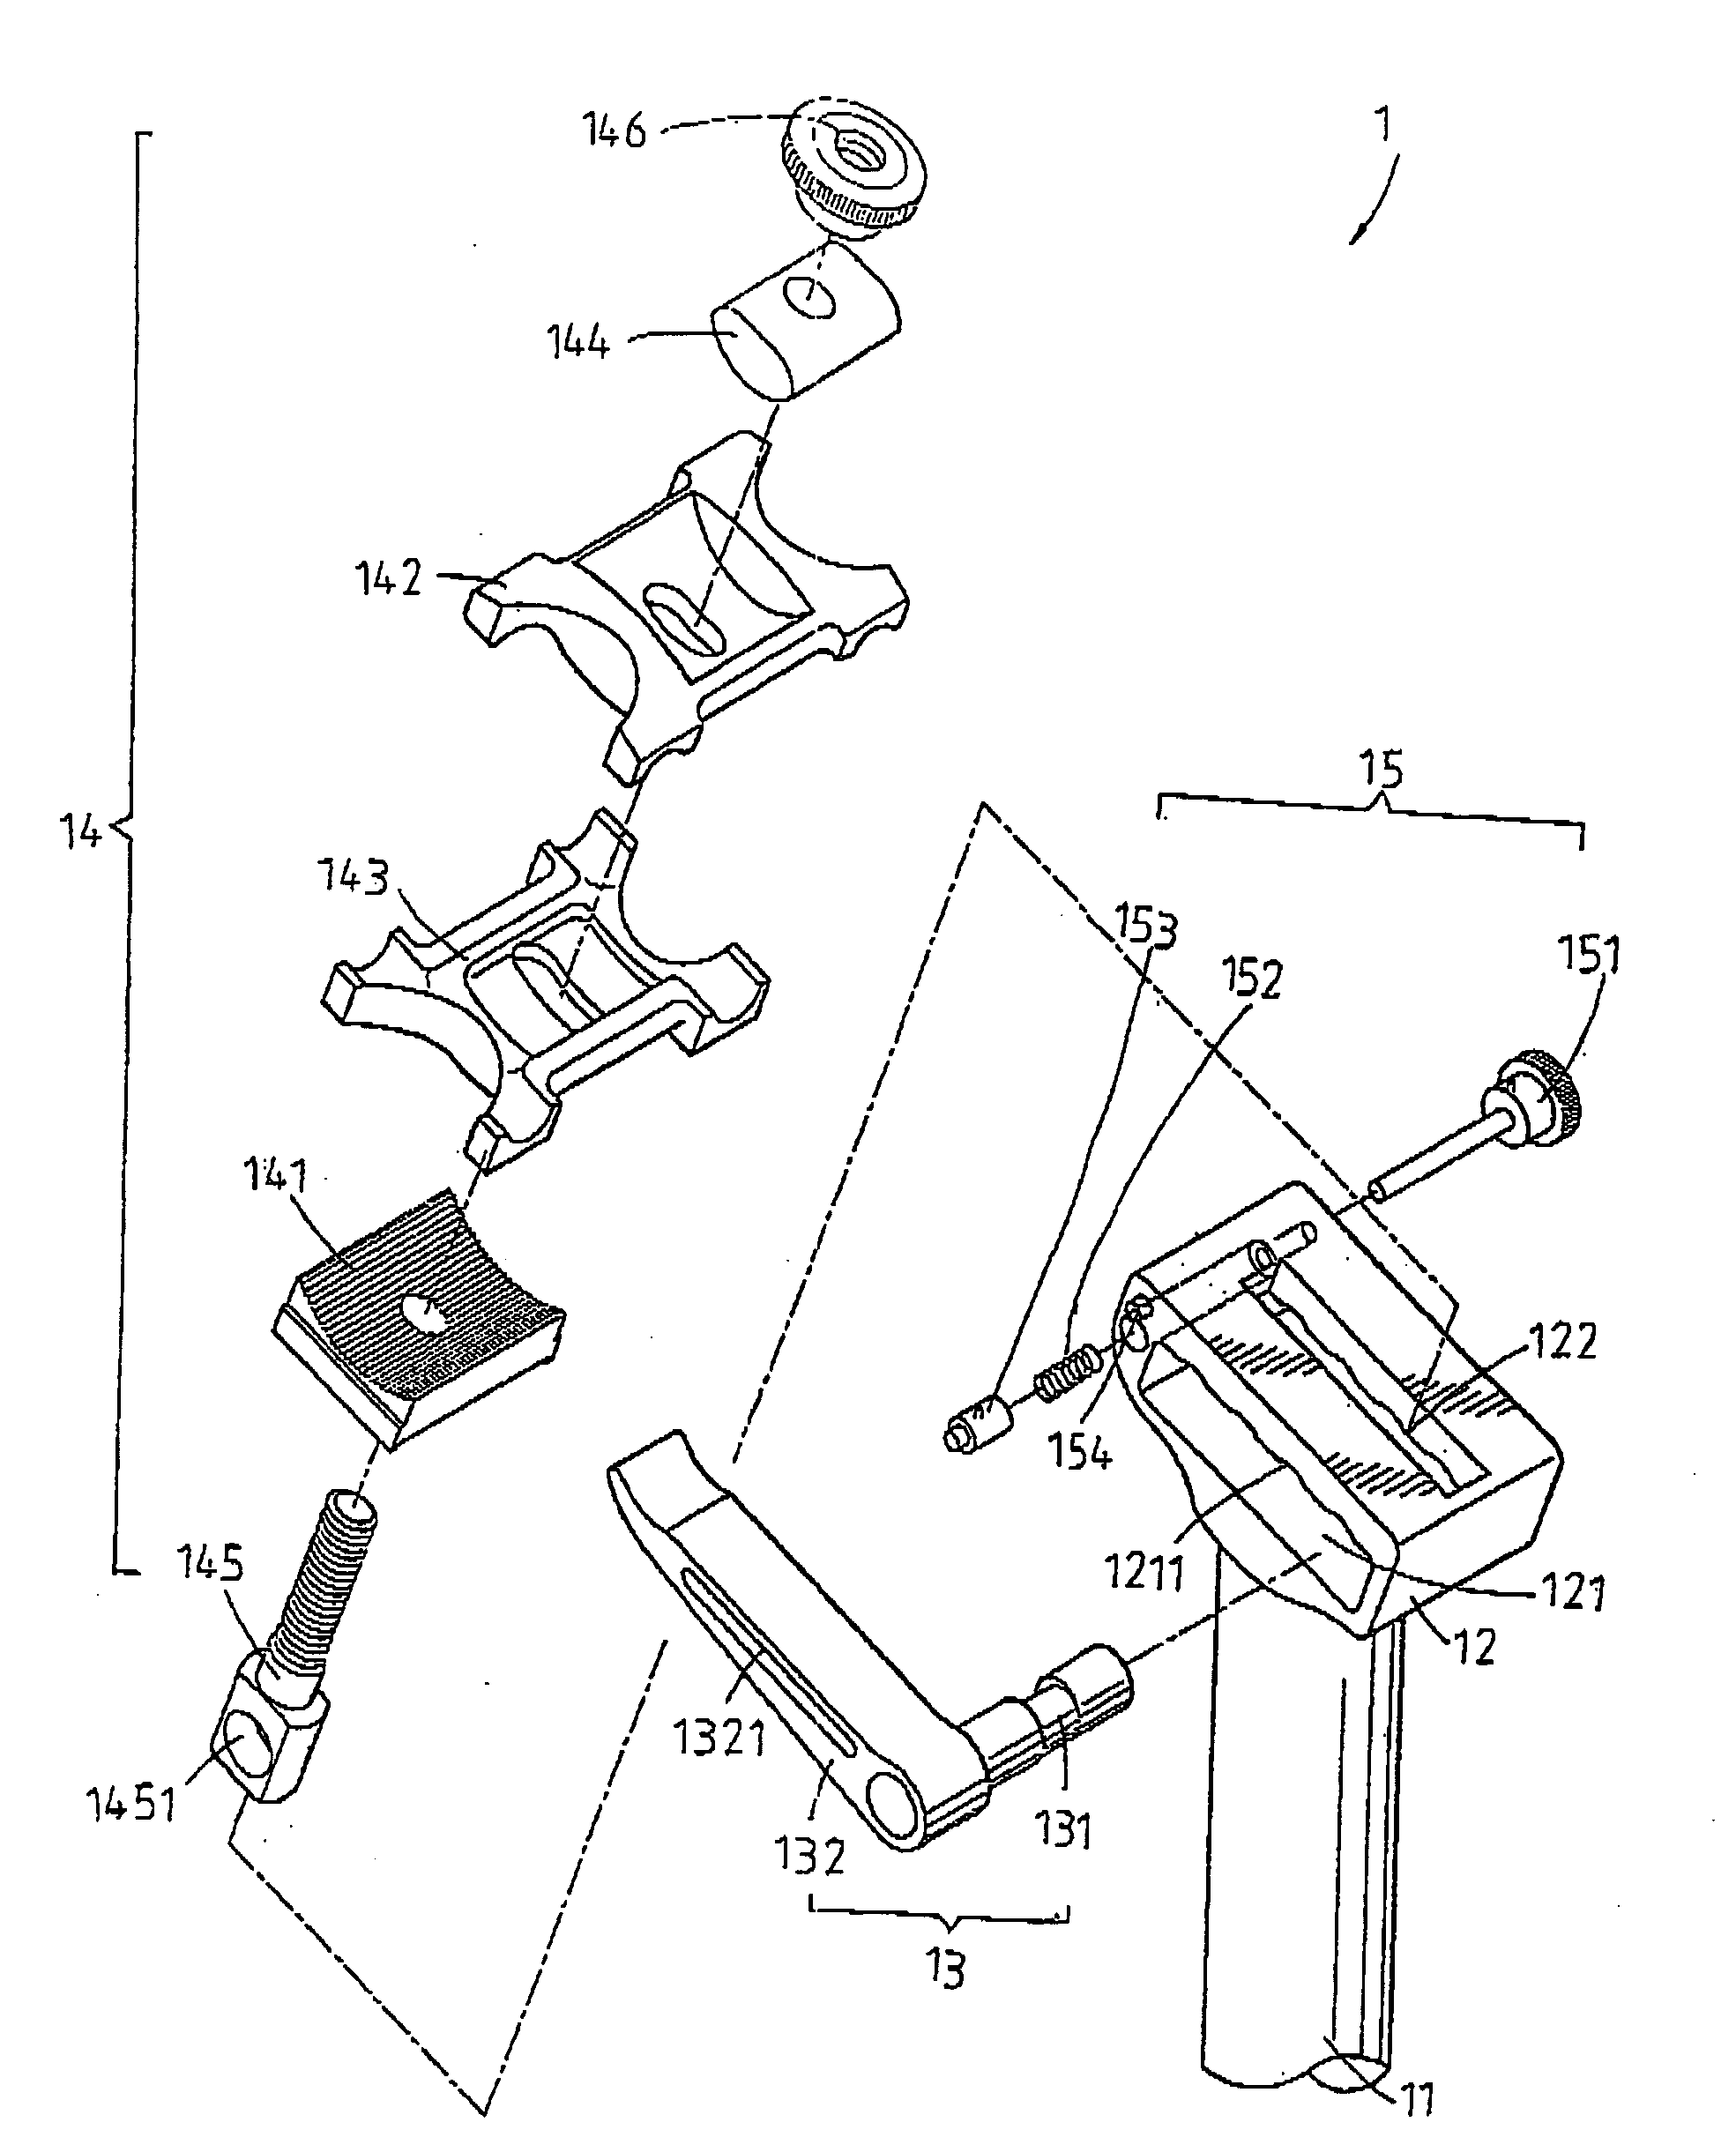 Seat rod of a bicycle